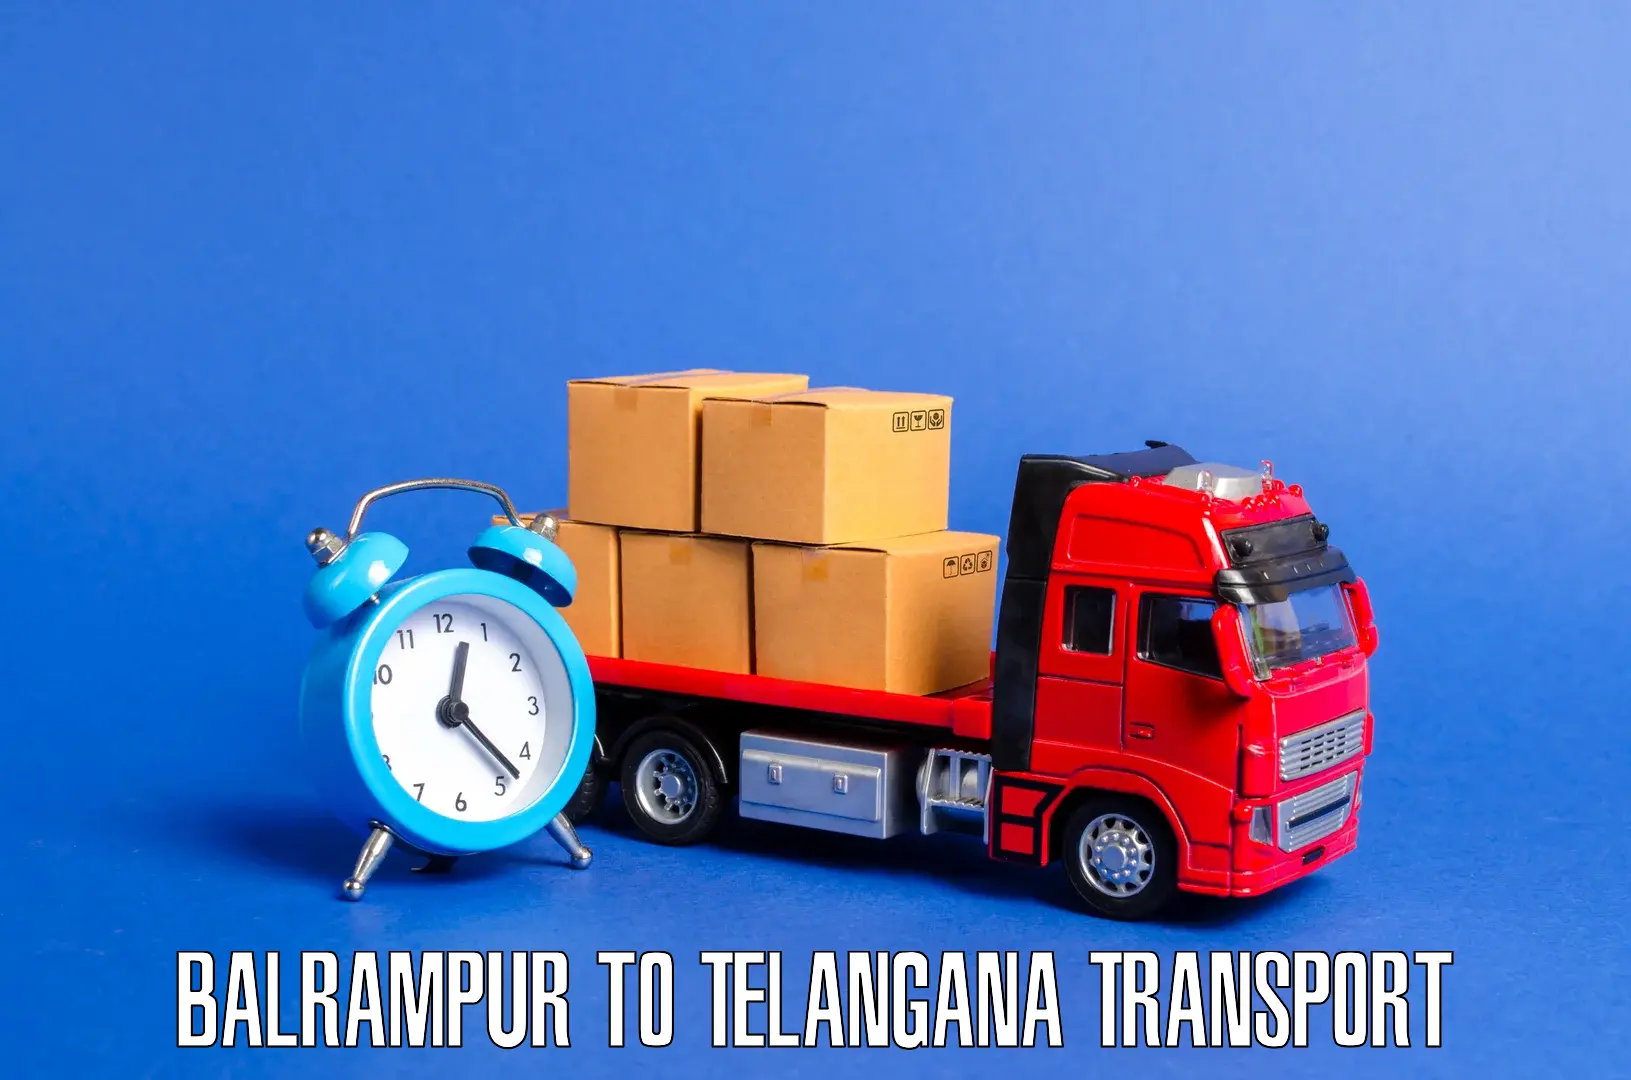 Air freight transport services in Balrampur to Wanaparthy